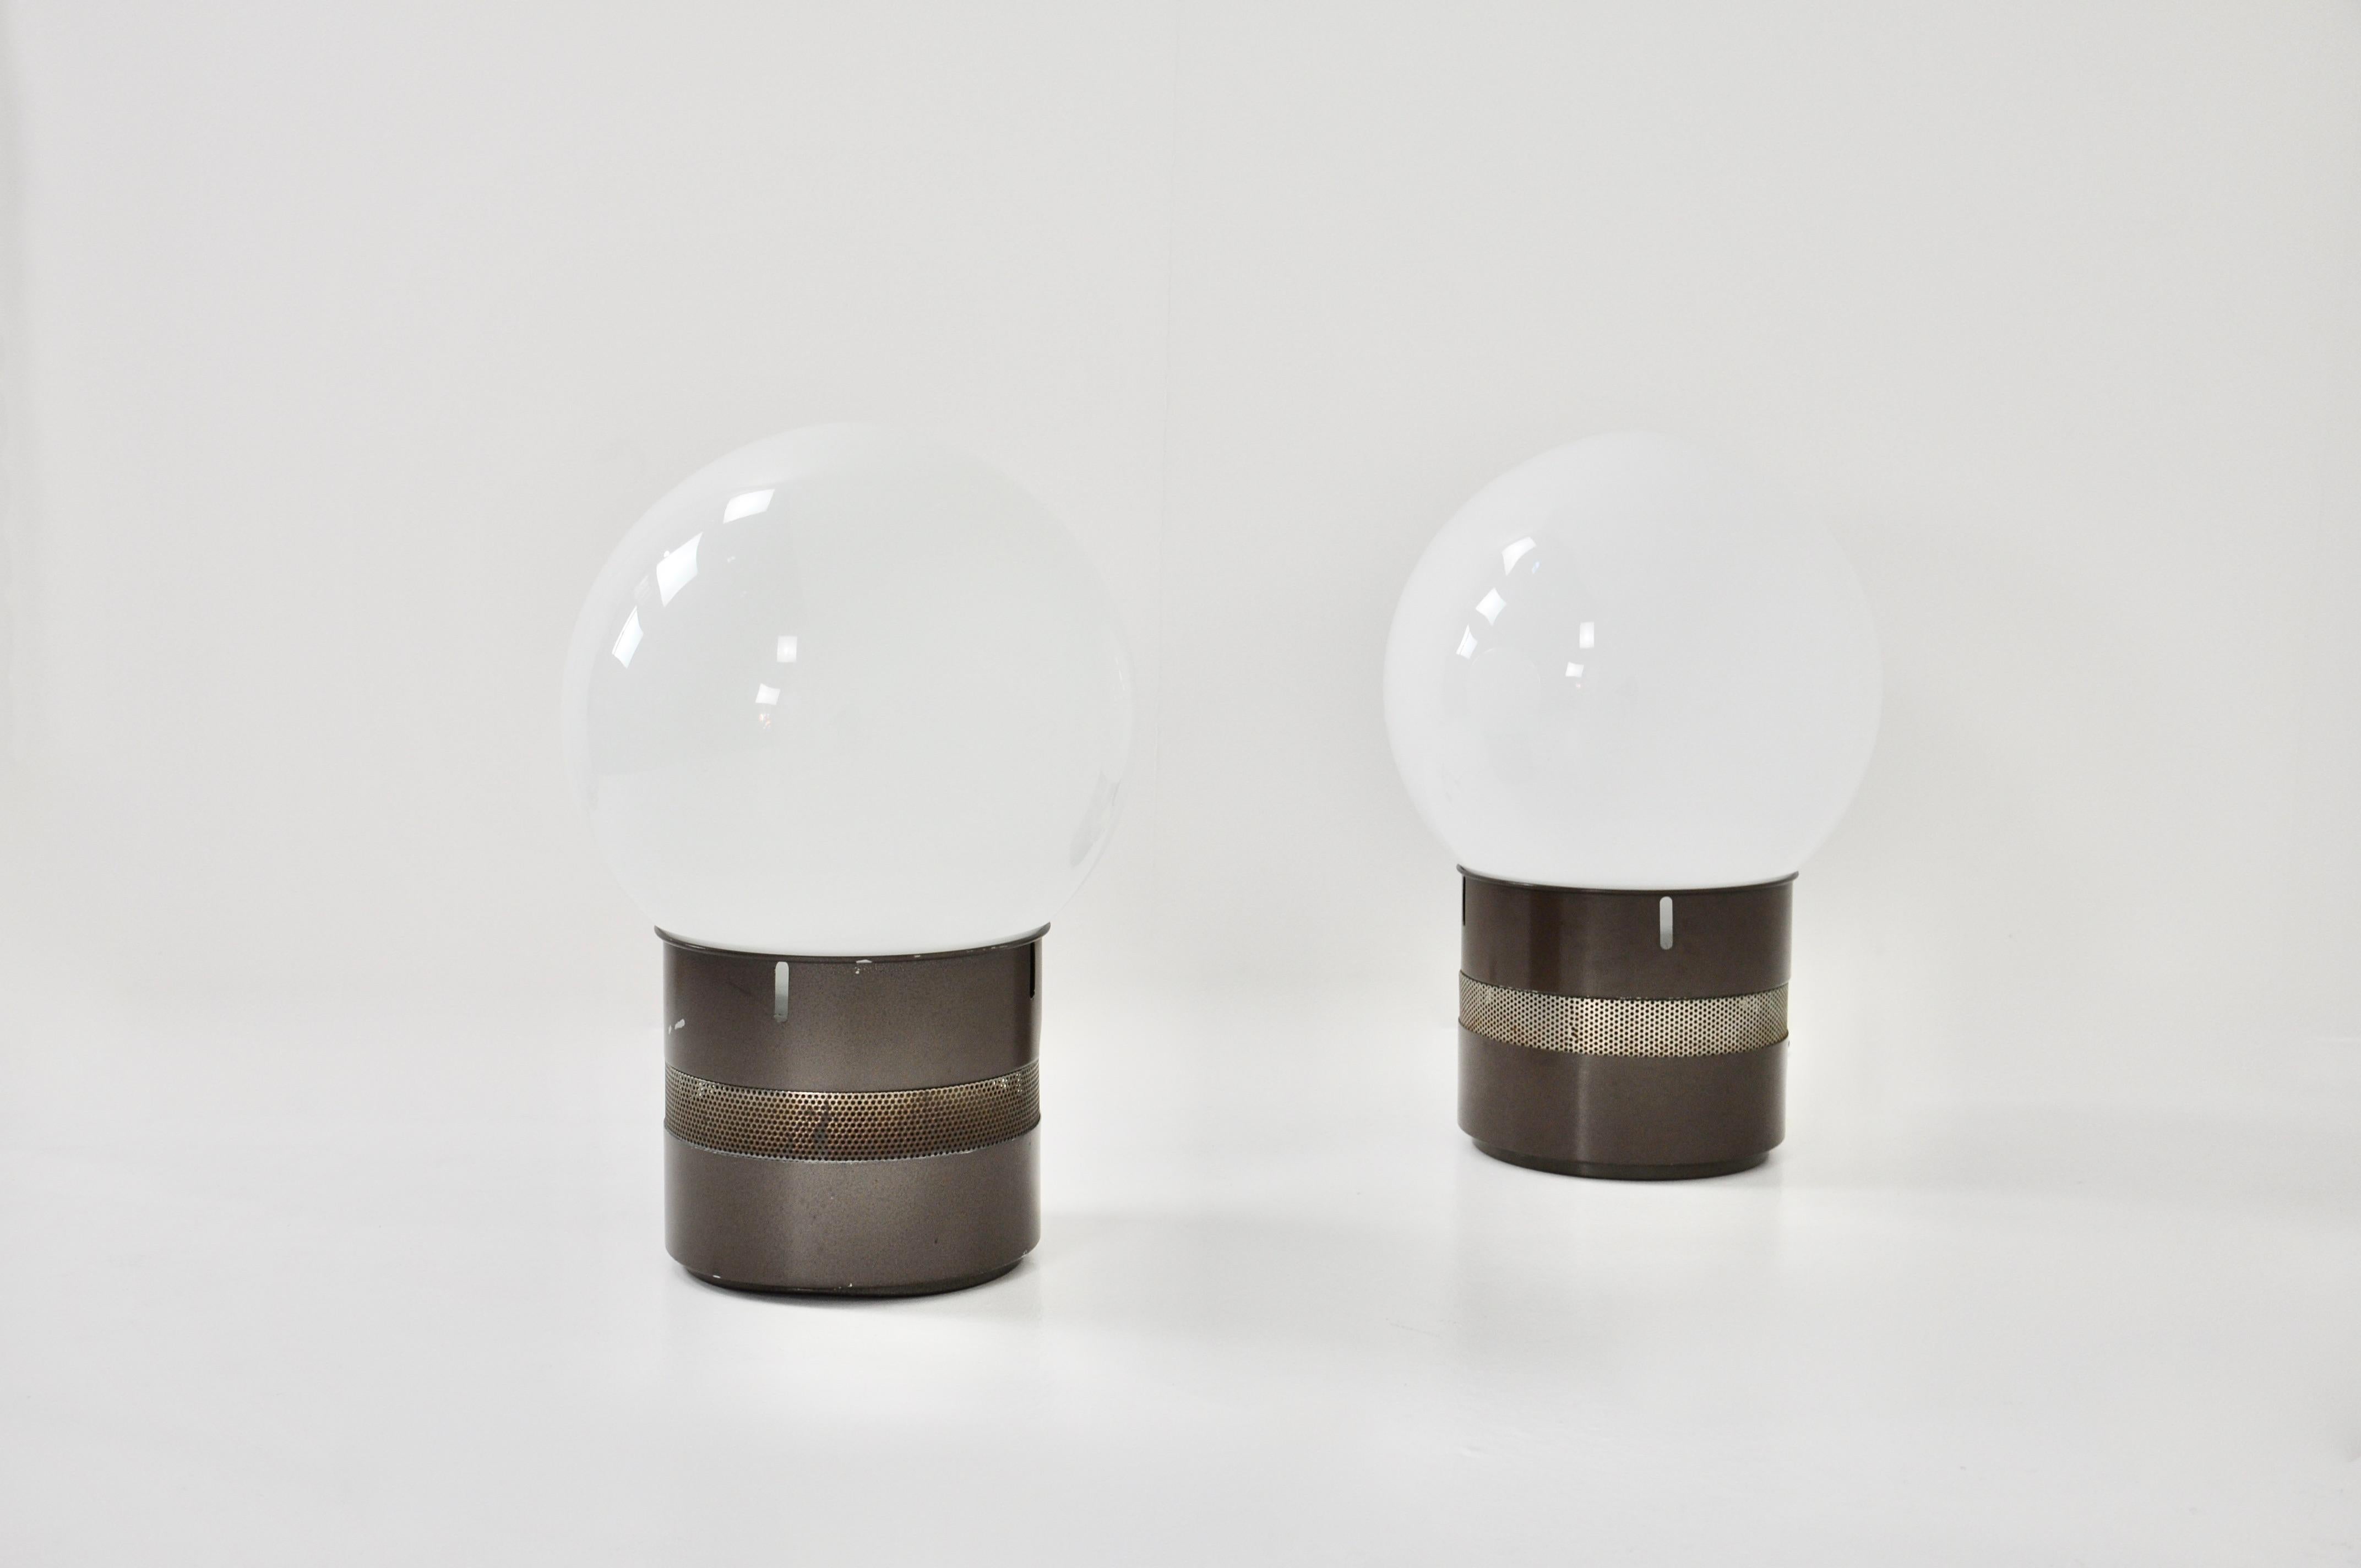 Pair of metal lamps with Oracle glass ball by Gae Aulenti. Wear due to time and age of the lamp.